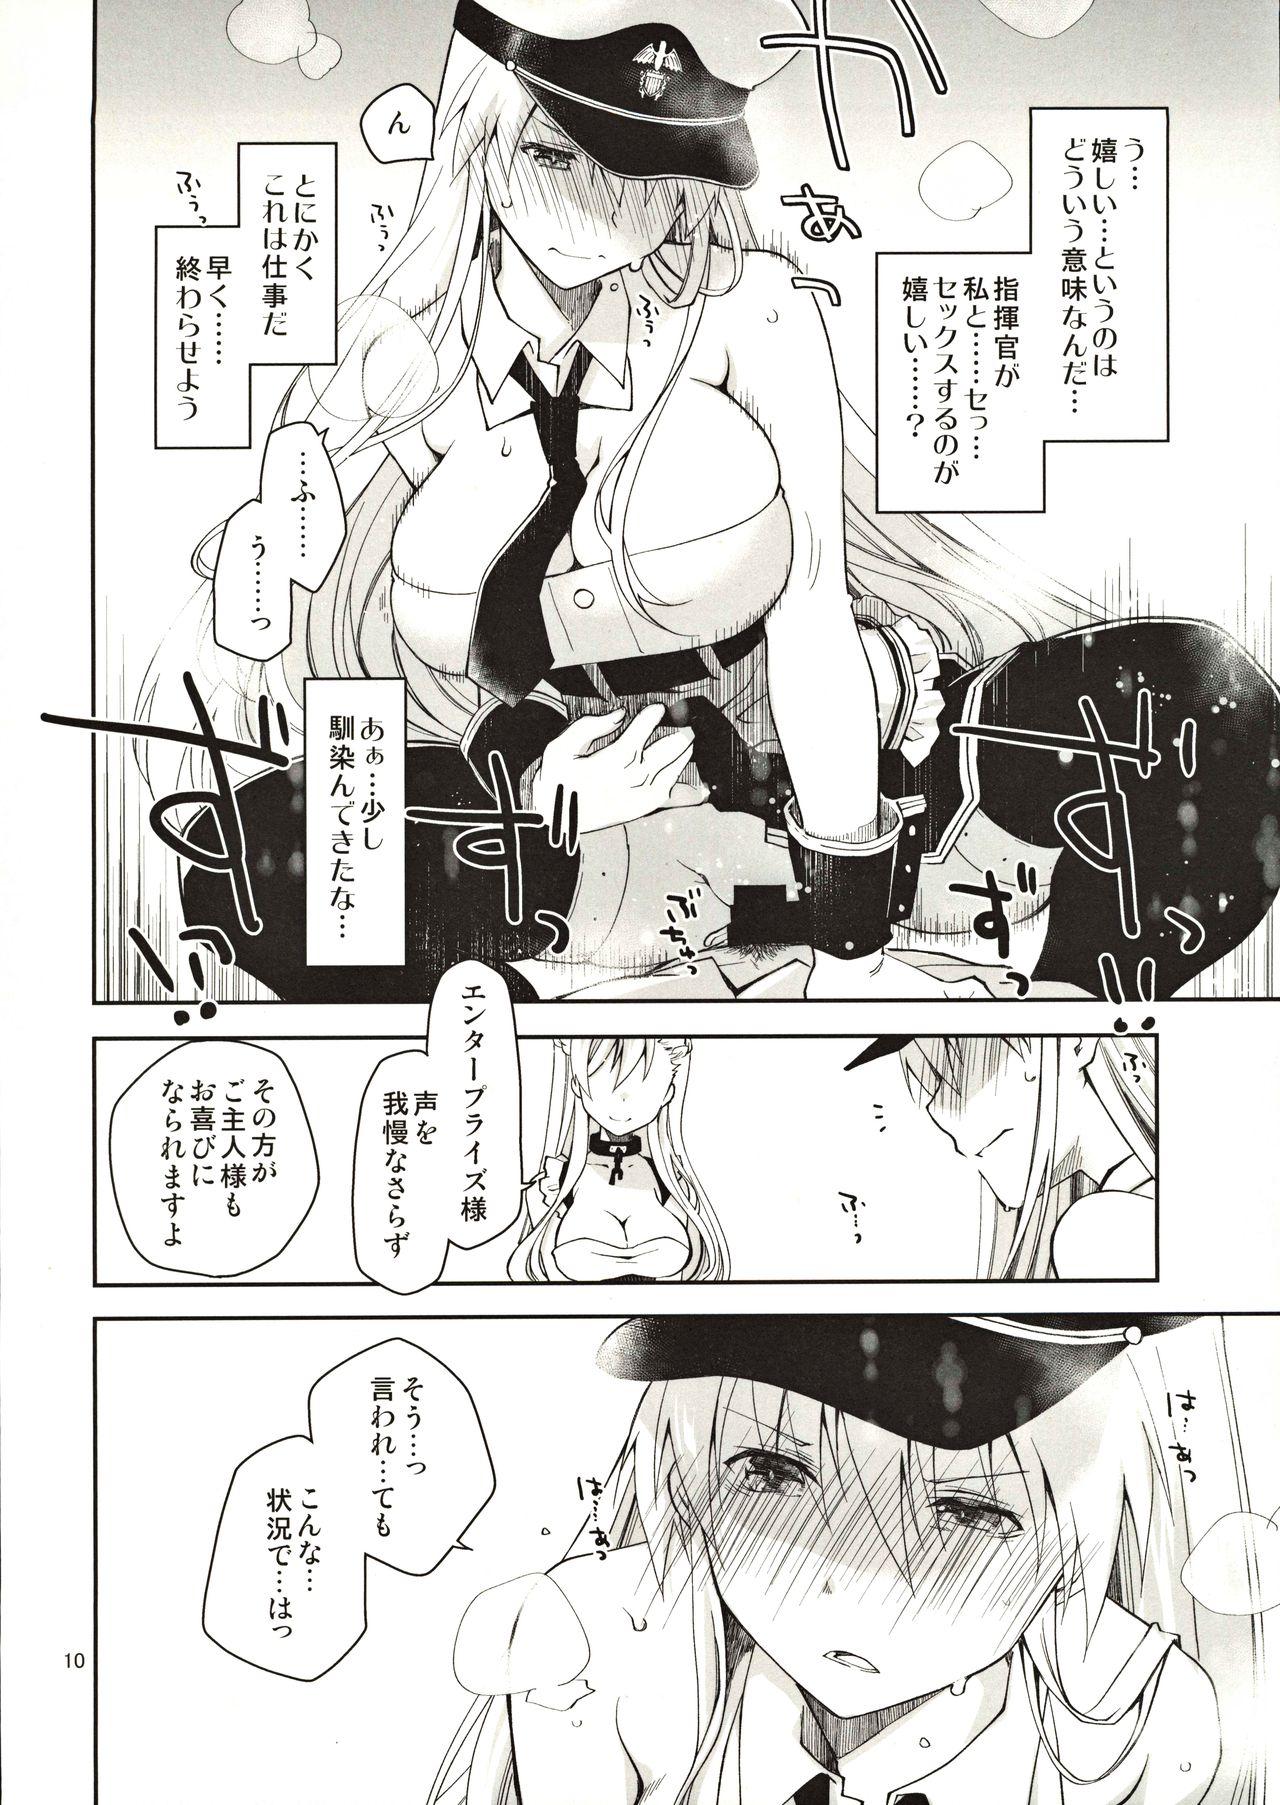 Butt Plug Maid in Enterprise - Azur lane Hairy Pussy - Page 9